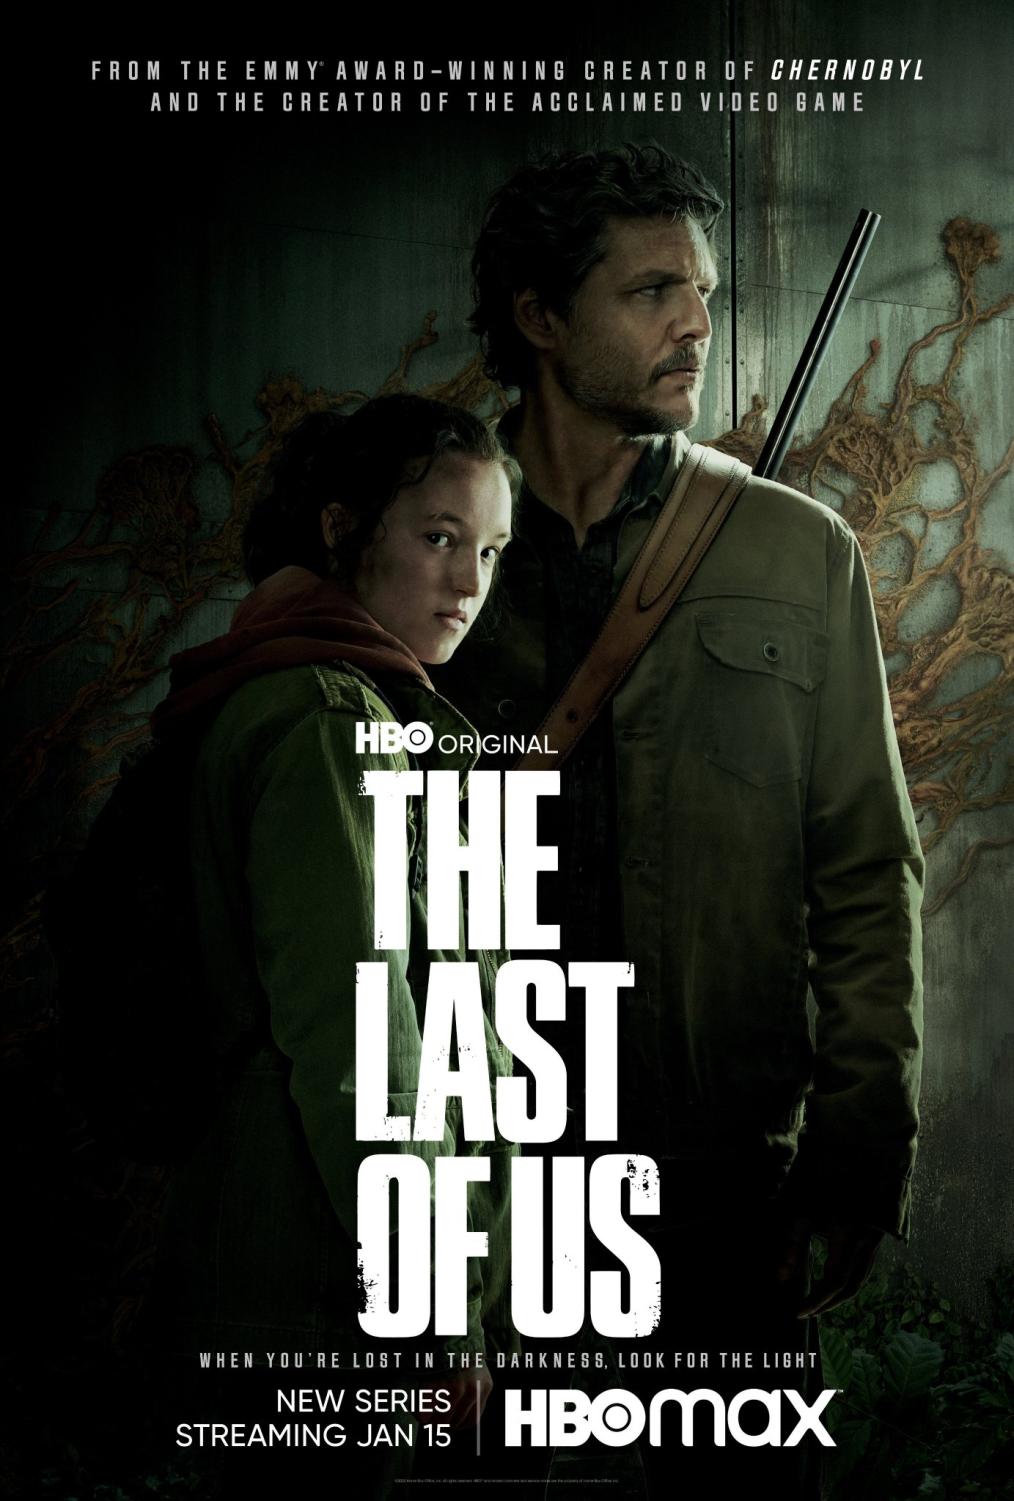 HBO's 'The Last of Us' Lifts the Video Game Adaptation Curse - The